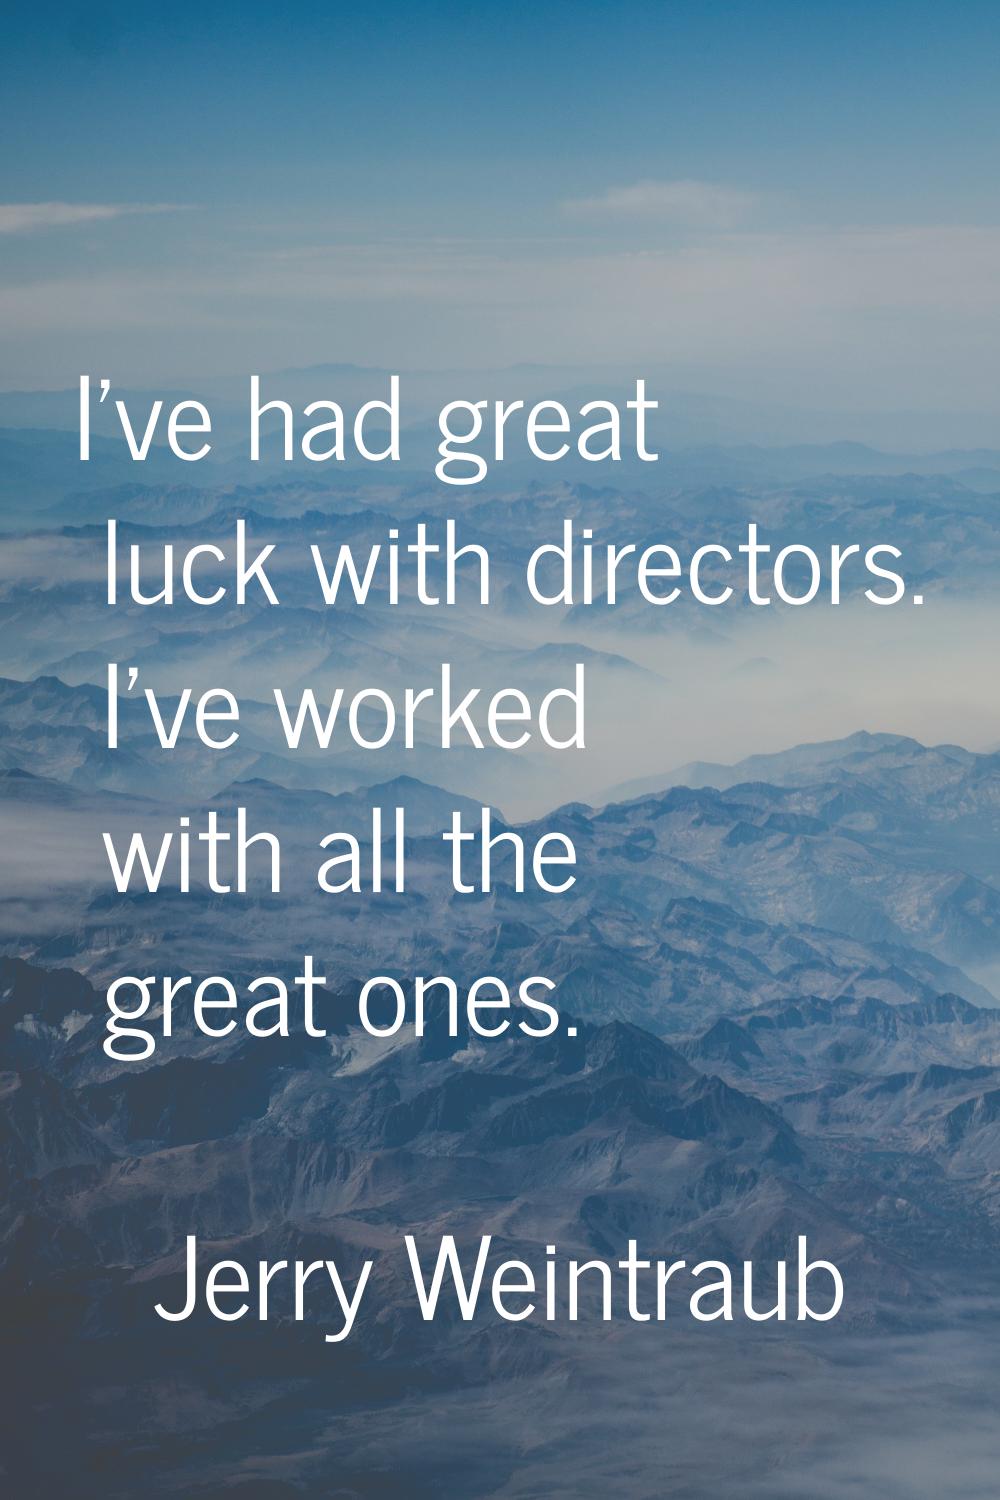 I've had great luck with directors. I've worked with all the great ones.